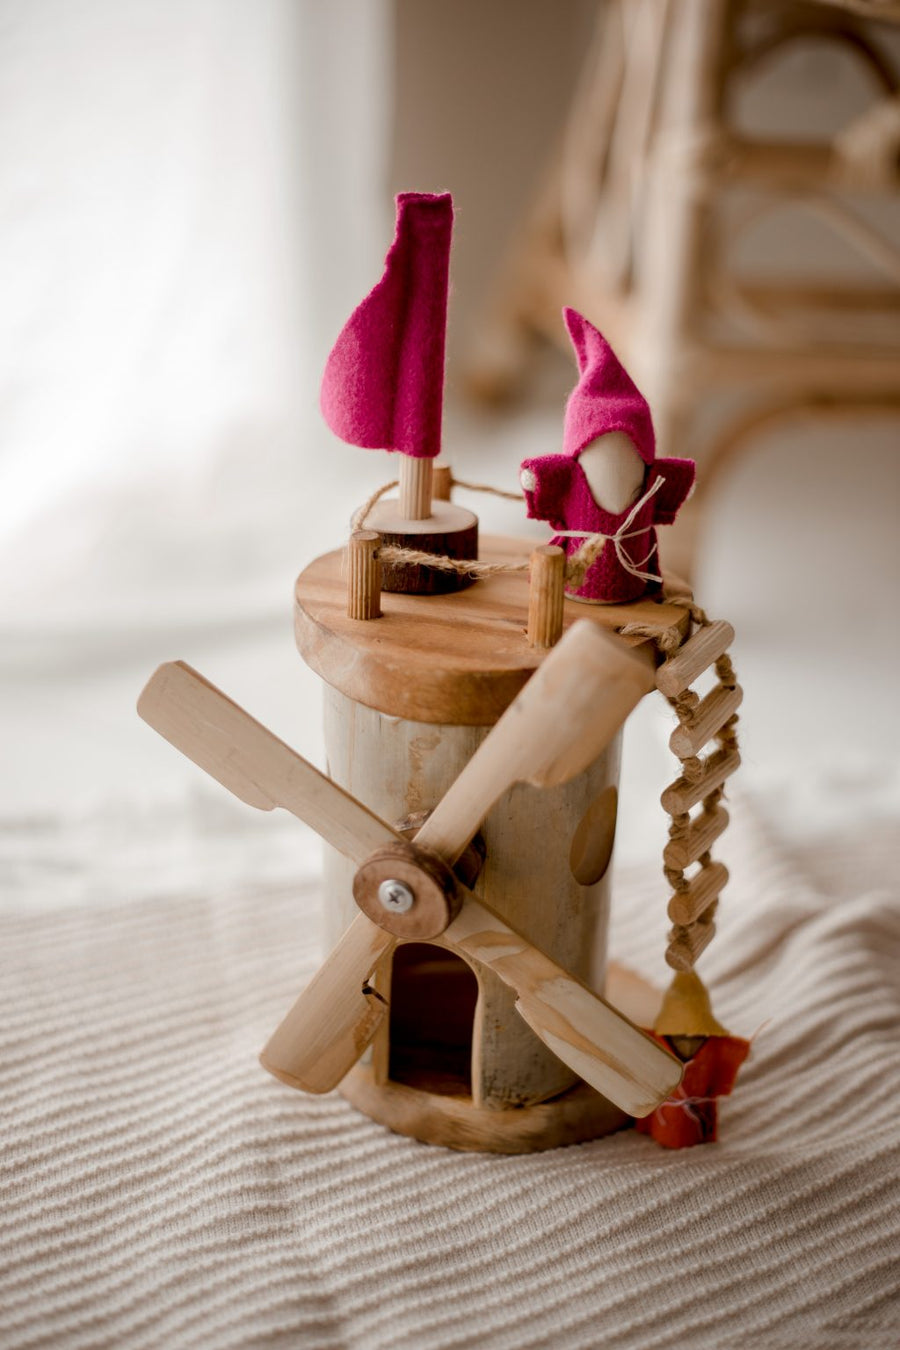 Qtoys | Wooden Windmill and Gnomes